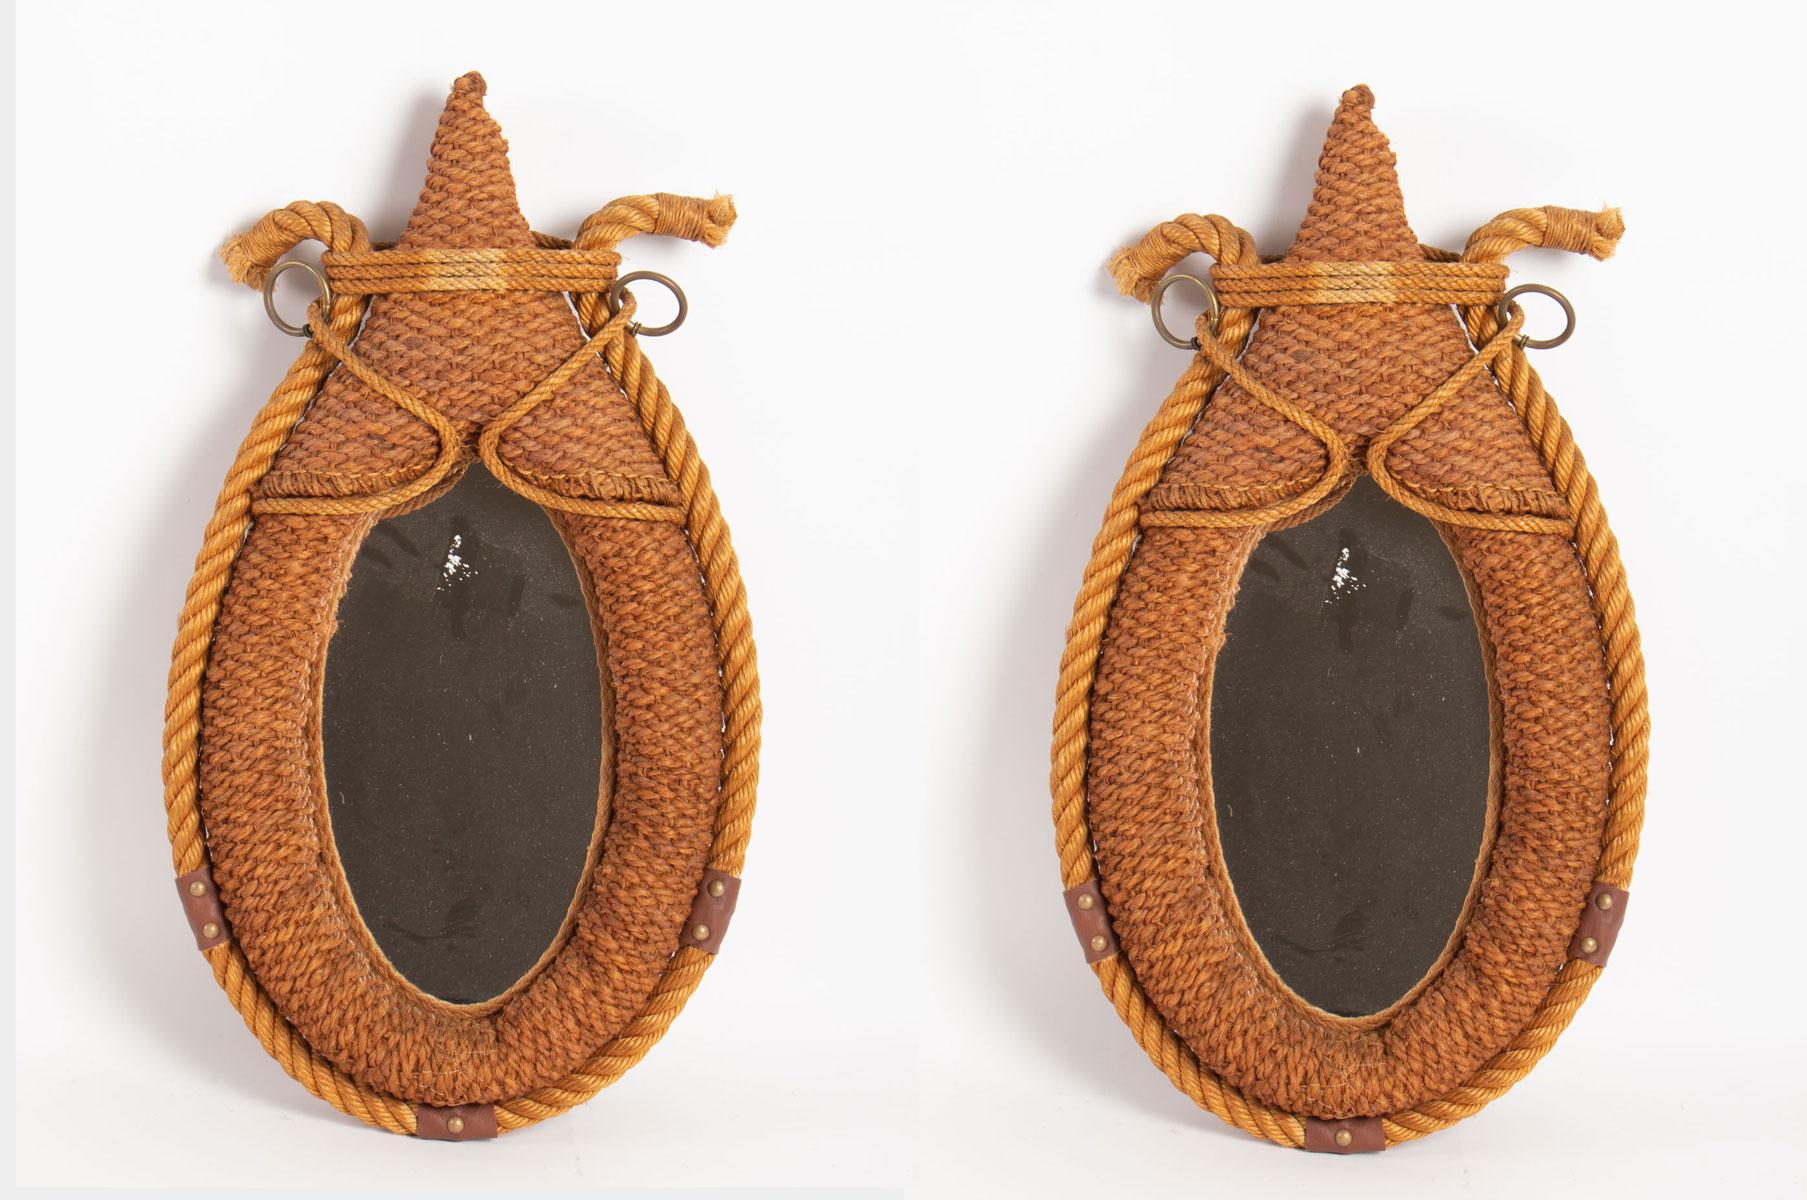 Spectacular pair of wall mirors, by Adrien Audoux and Frida Minet, France, 1950s
knotted and braided rope.